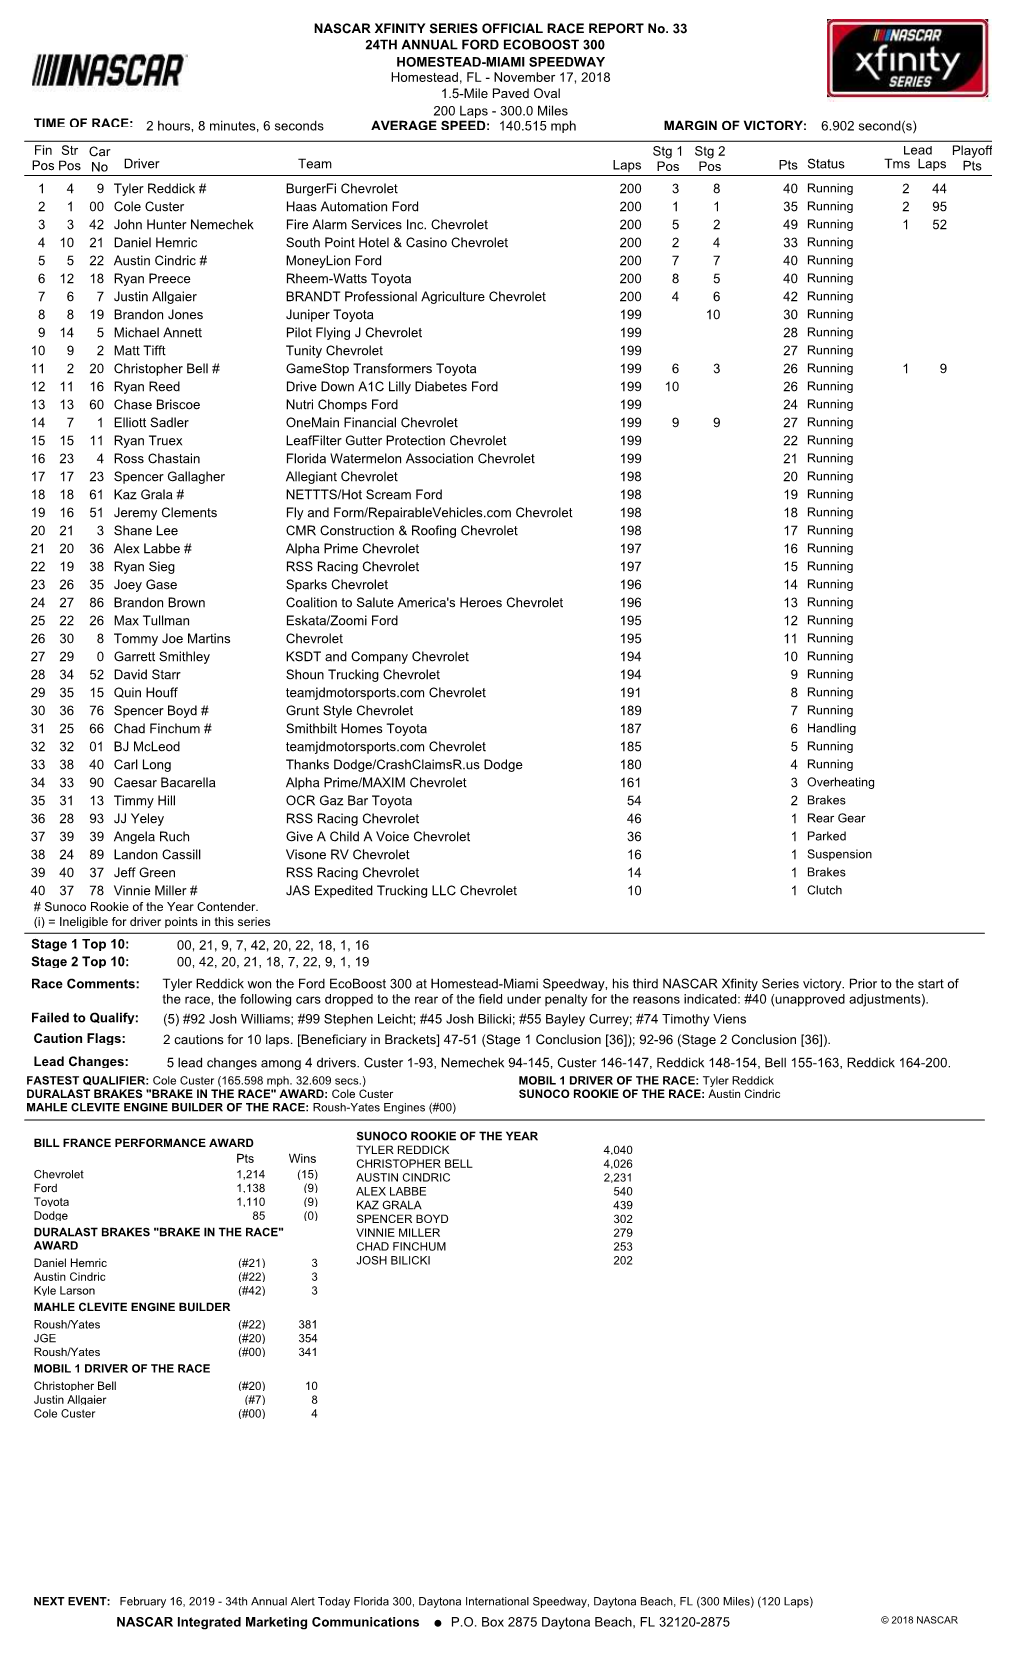 Official Homestead-Miami Speedway Race Results and Standings (Pdf)